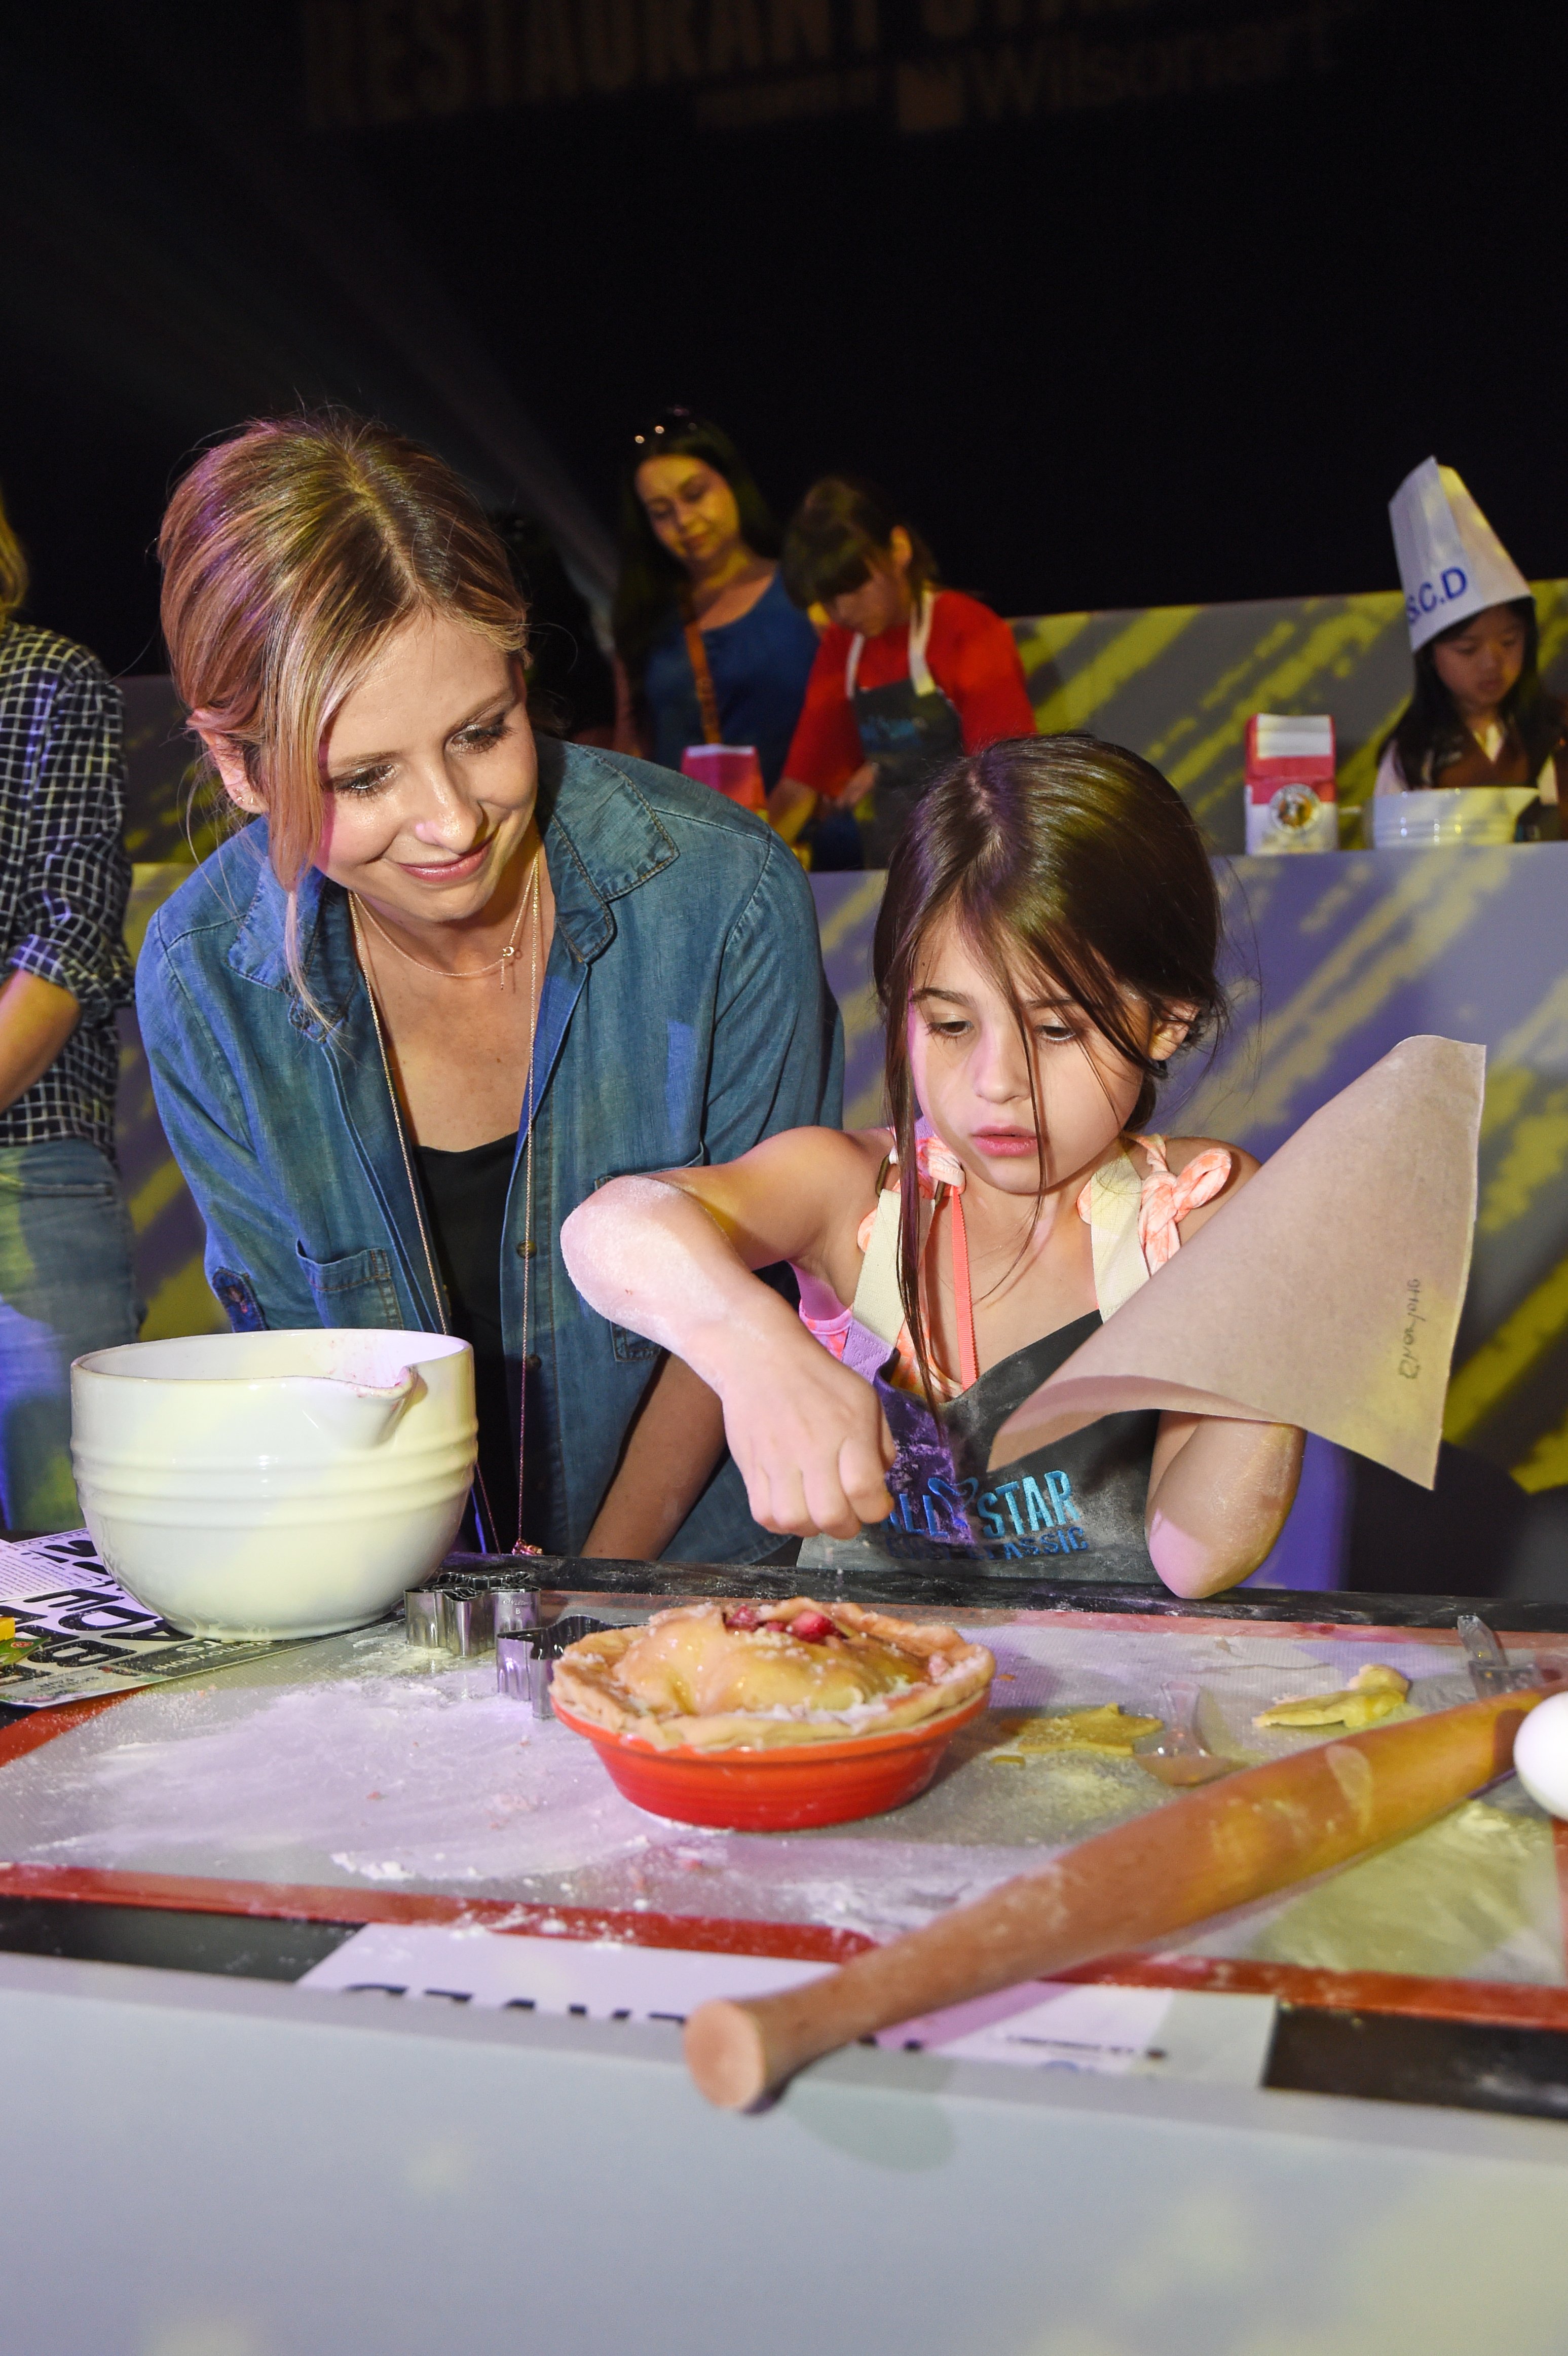 LOS ANGELES, CA - MARCH 14: Actress Sarah Michelle Gellar prepares a pie with her daughter Charlotte at L.A. LIVE's All-Star Chef Classic, Kitchen Kids, presented by Le Creuset on March 14, 2015 in Los Angeles, California | Source: Getty Images 